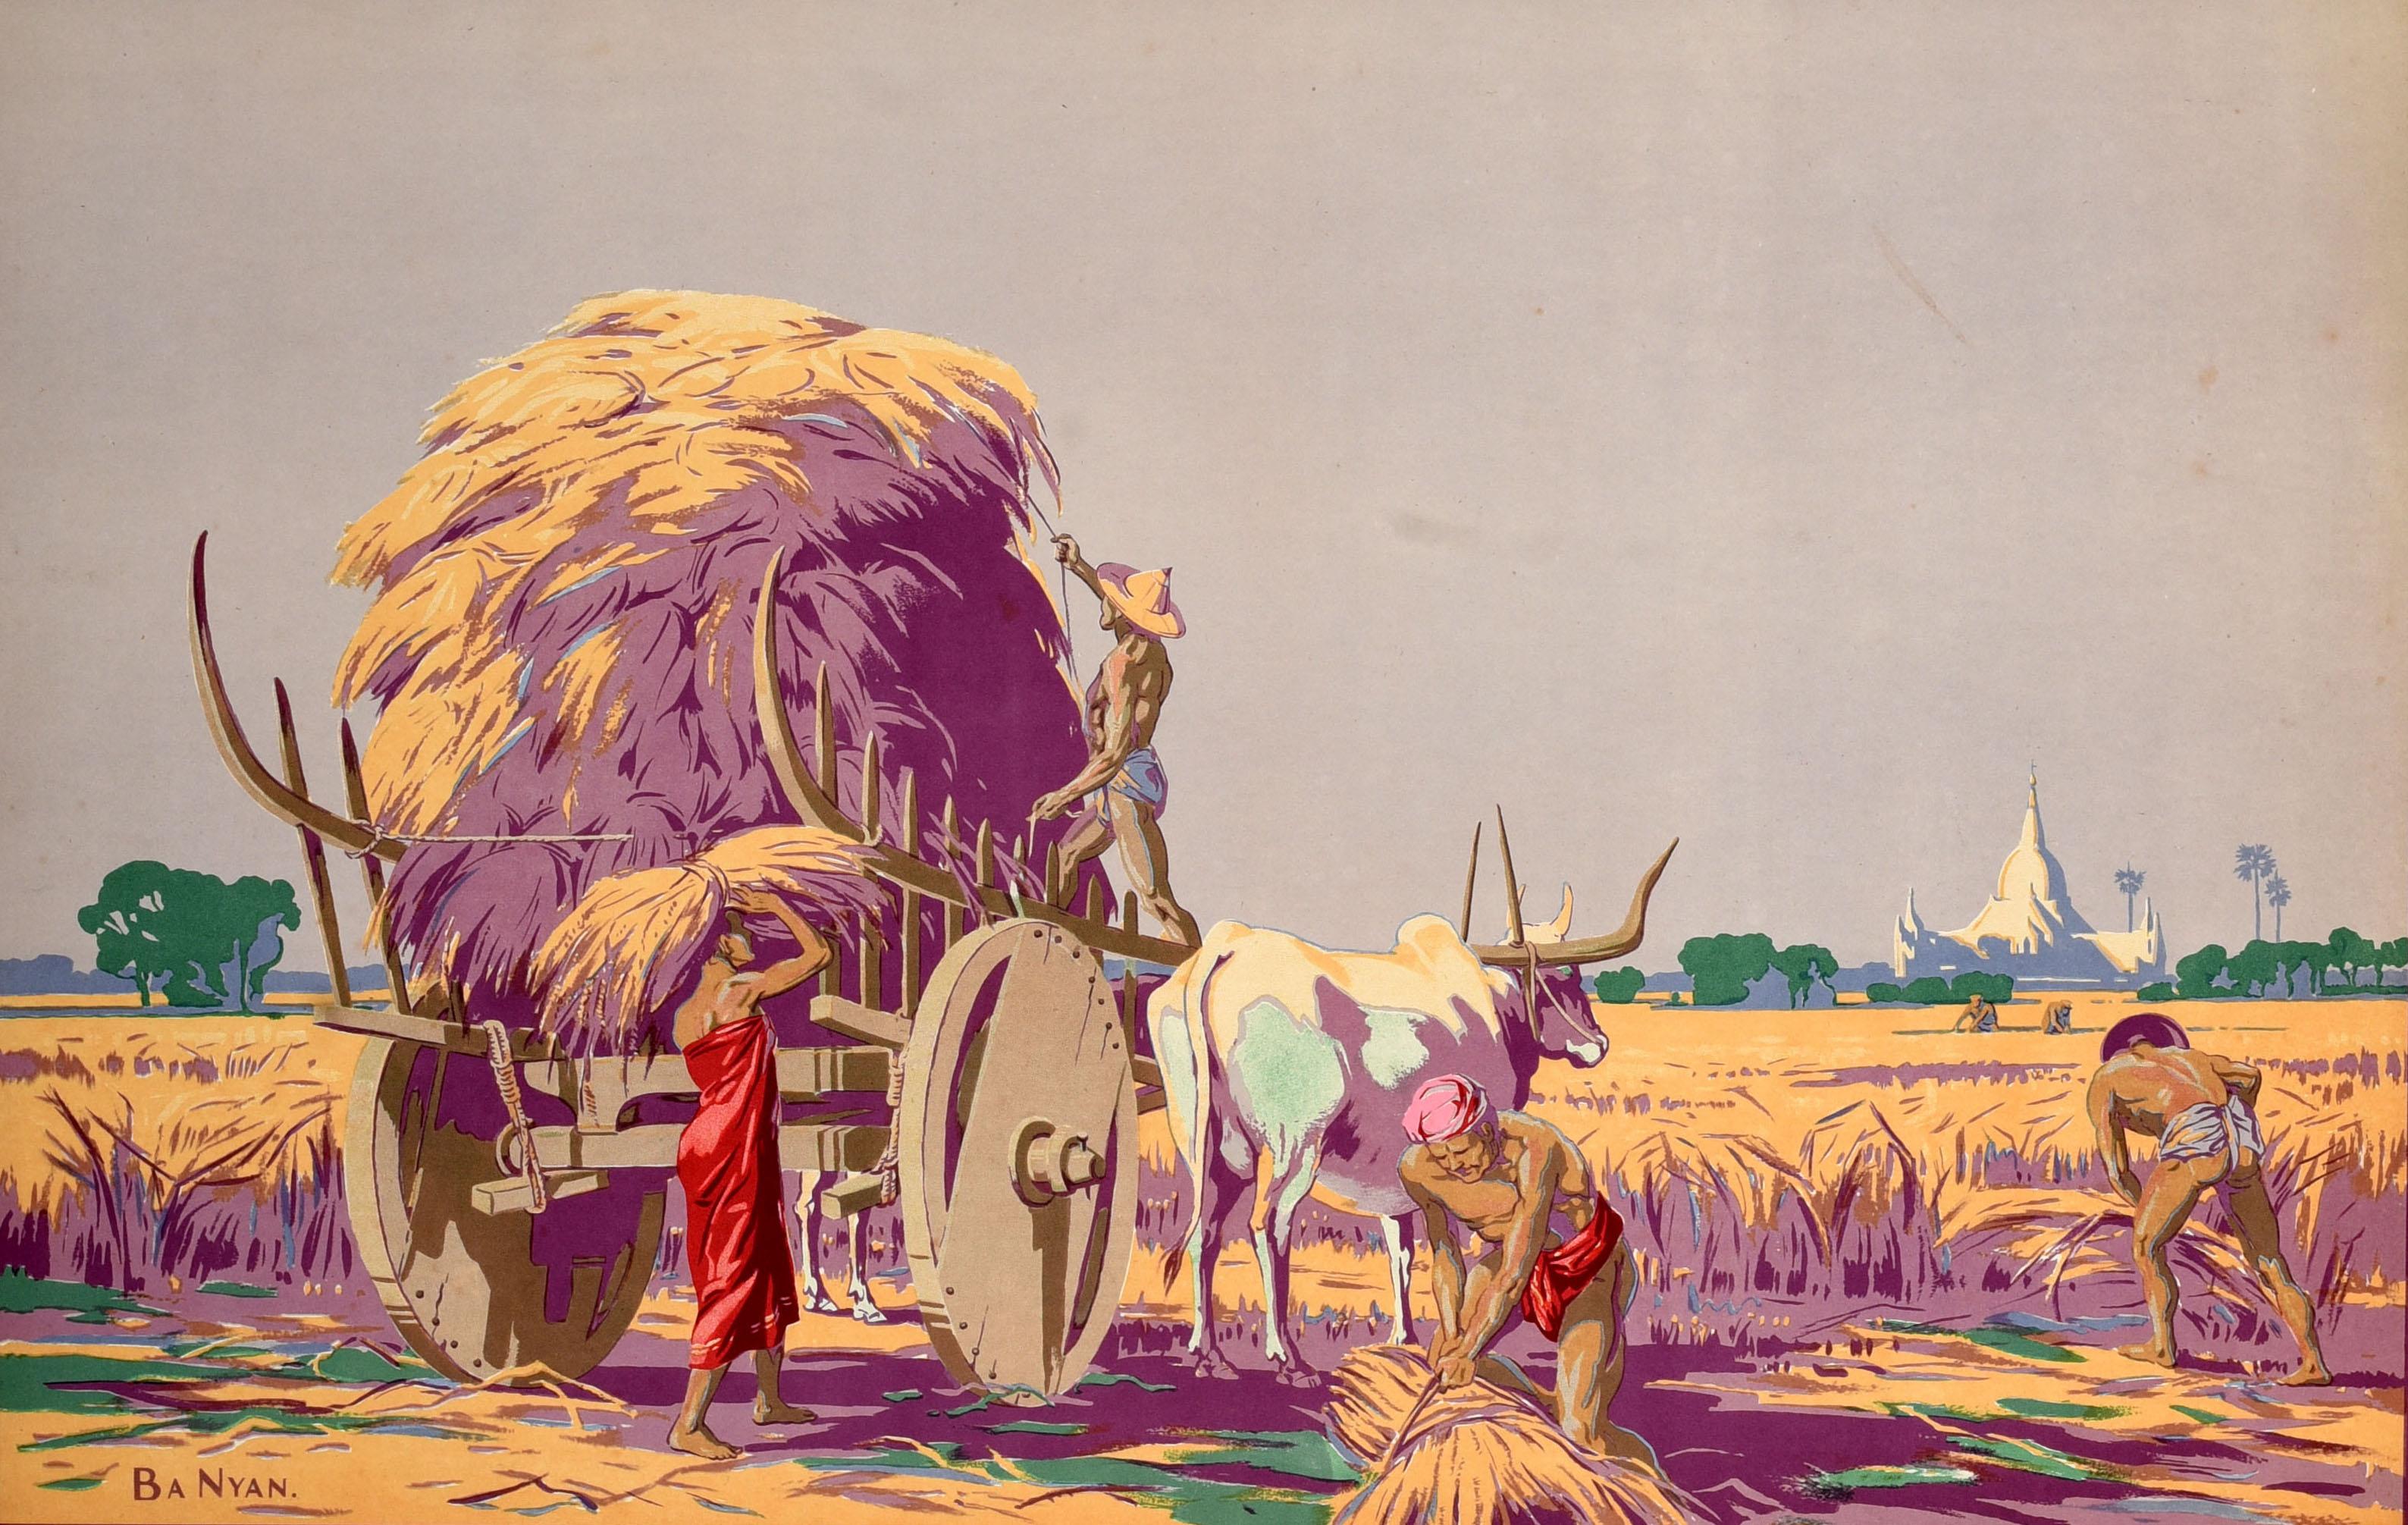 Original vintage poster - Paddy Field Burmah - issued by the Empire Marketing Board (EMB 1926-1933) featuring artwork by the notable Burmese artist Ba Nyan (1897-1945) depicting farm workers harvesting rice in a paddy field and stacking the crop